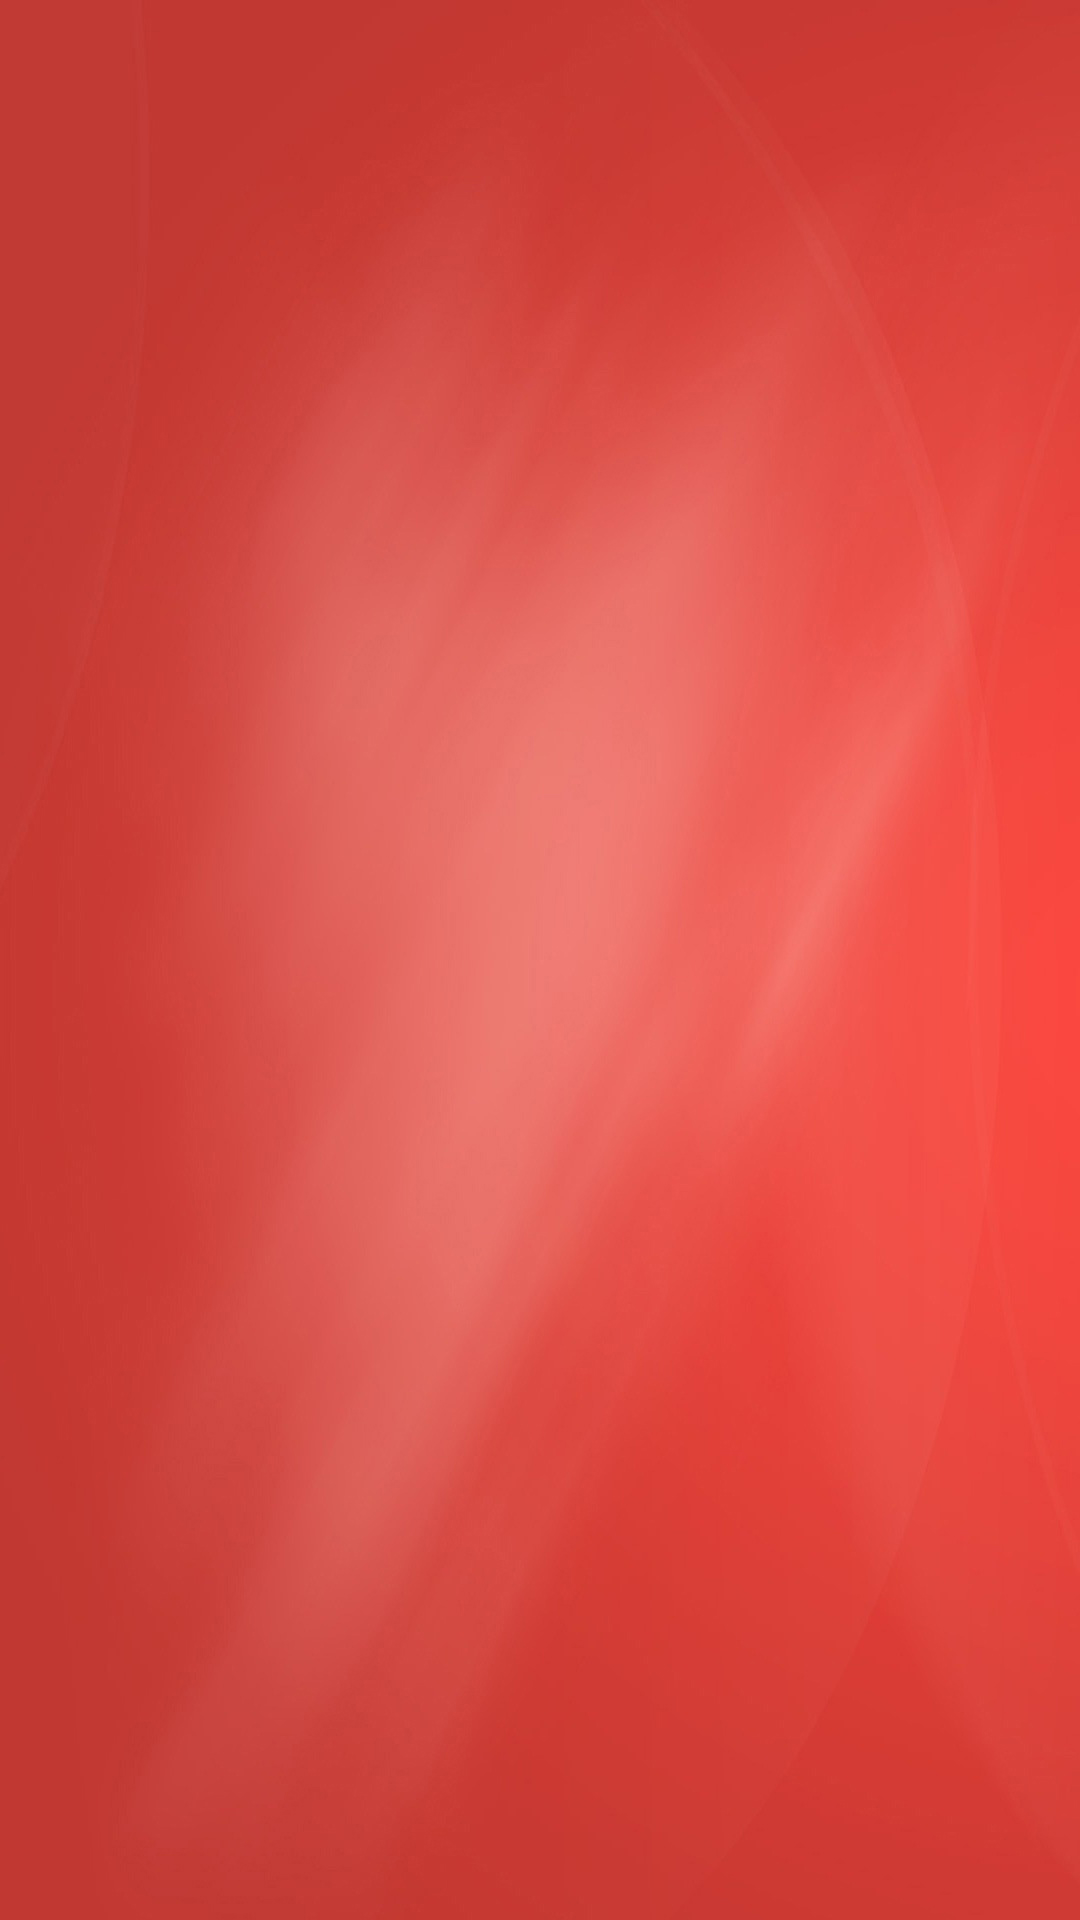 Simple Red Angled Gradient Android Wallpaper